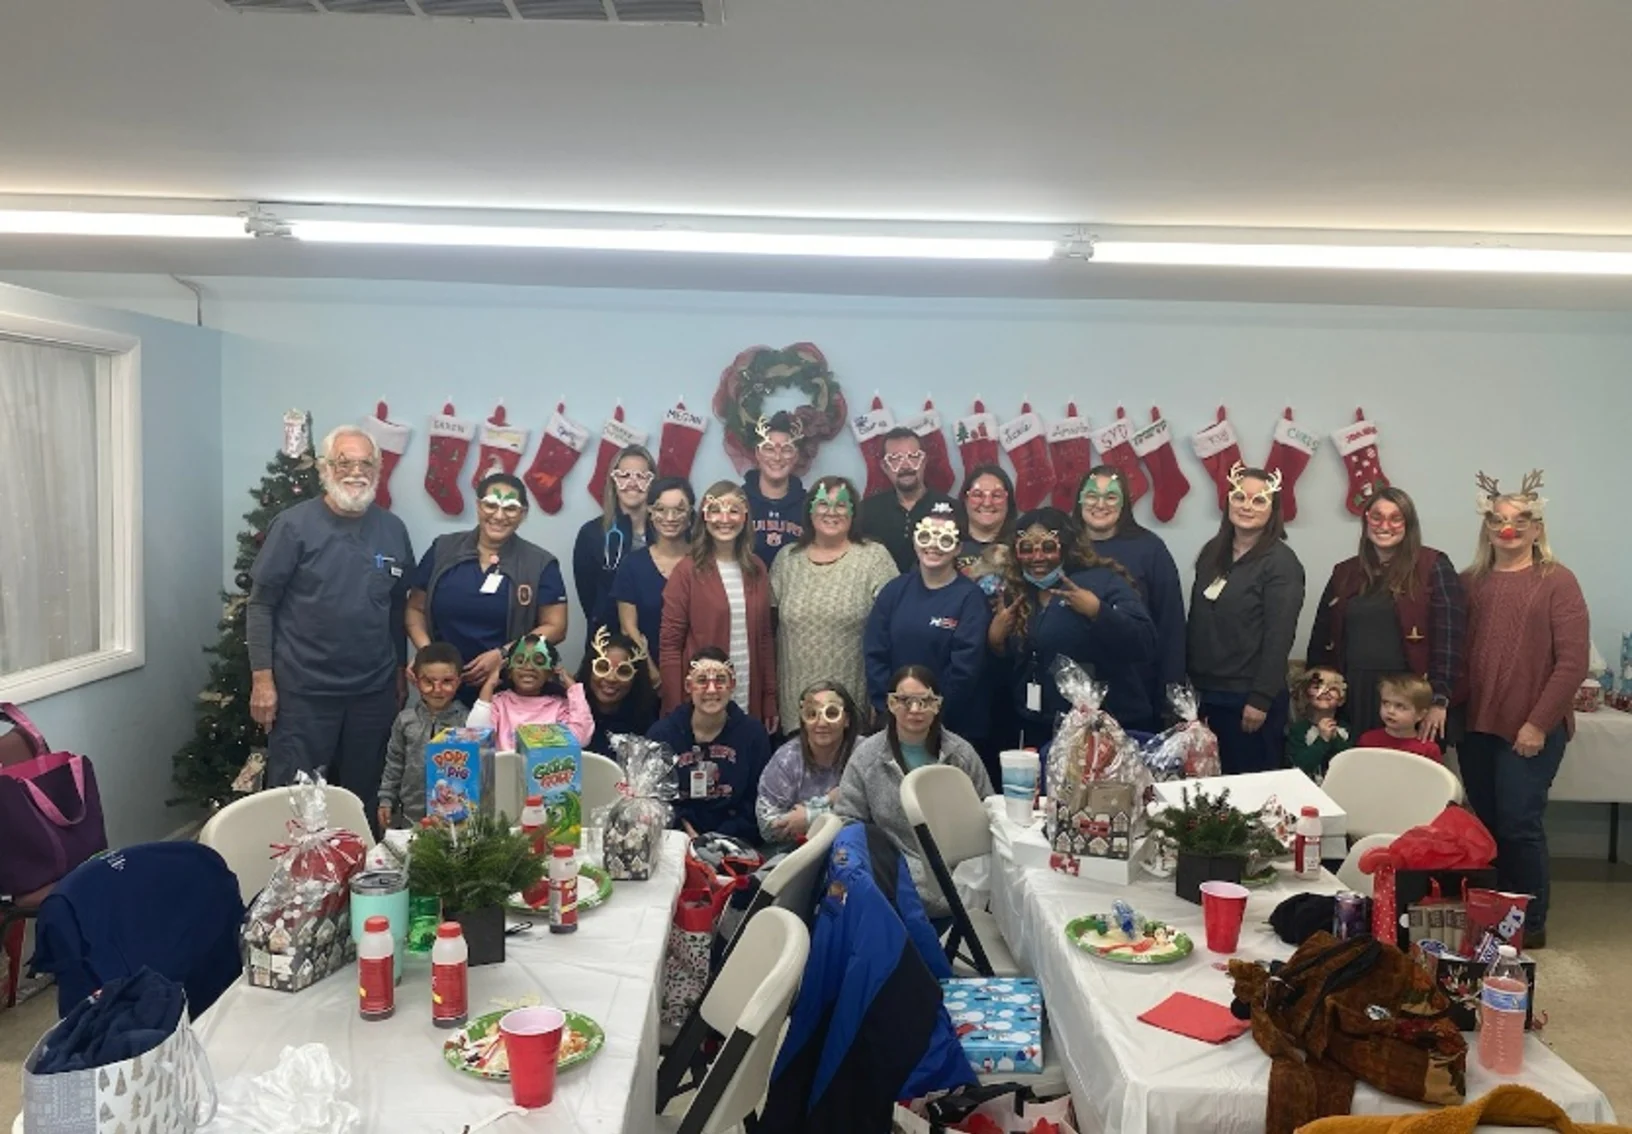 The staff at Animal Emergency and Critical Care posing at a holiday party